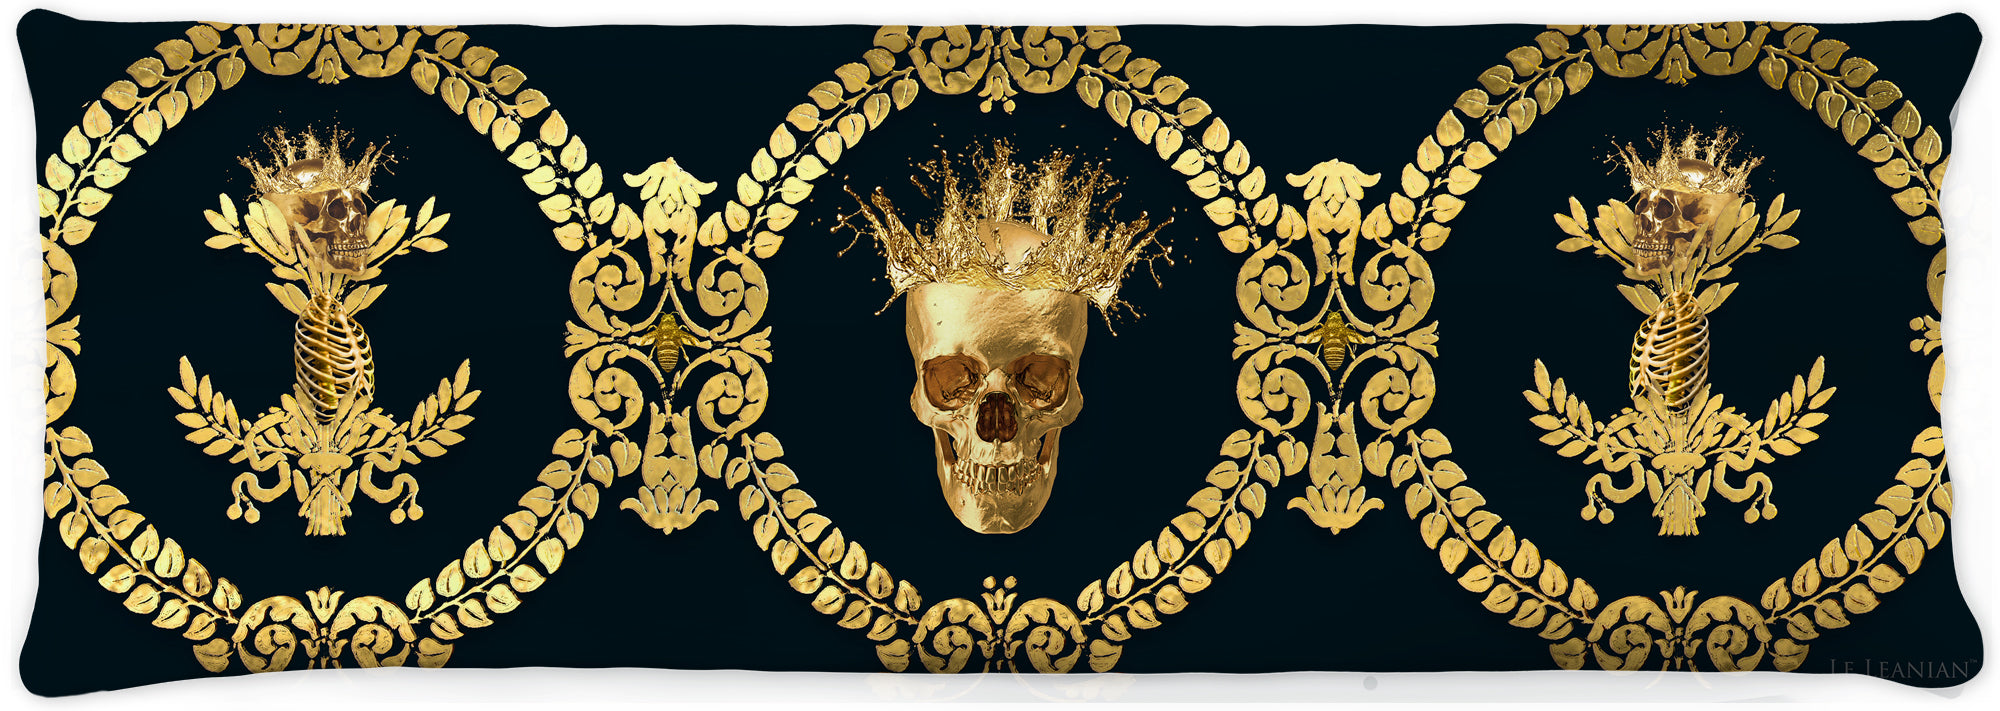 CROWN GOLD SKULL-GOLD RIBS-Body Pillow-PILLOW CASE- color NAVY BLUE